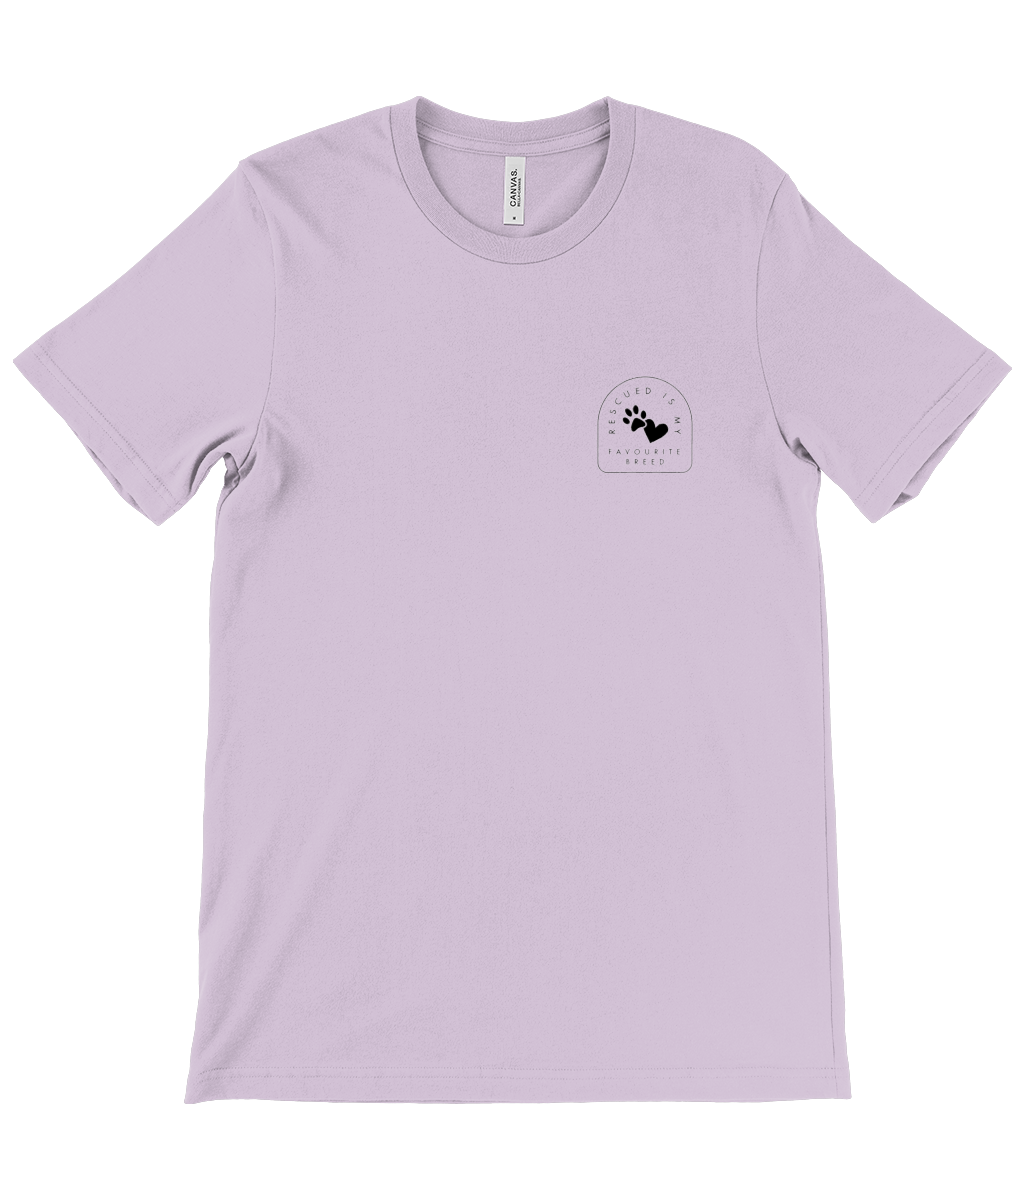 Unisex Rescued Breed T-Shirt - Soft Cotton, Vegan Inks, Supports Animal Welfare